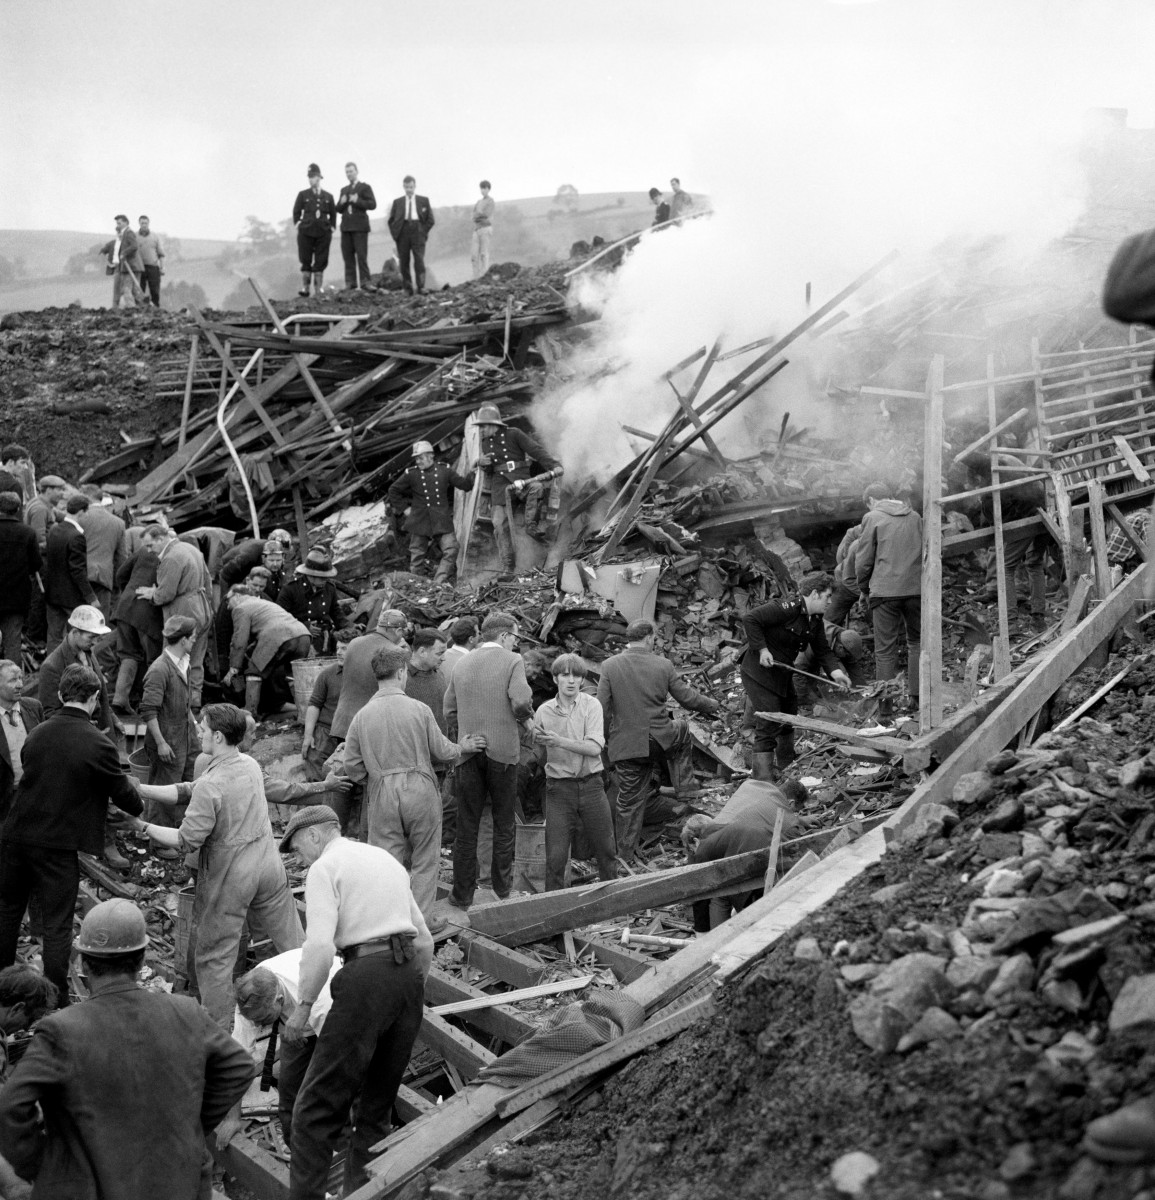 150,000 tonnes of coal wiped out the Plantglas Junior School killing 116 of the pupils who had arrived for morning classes 